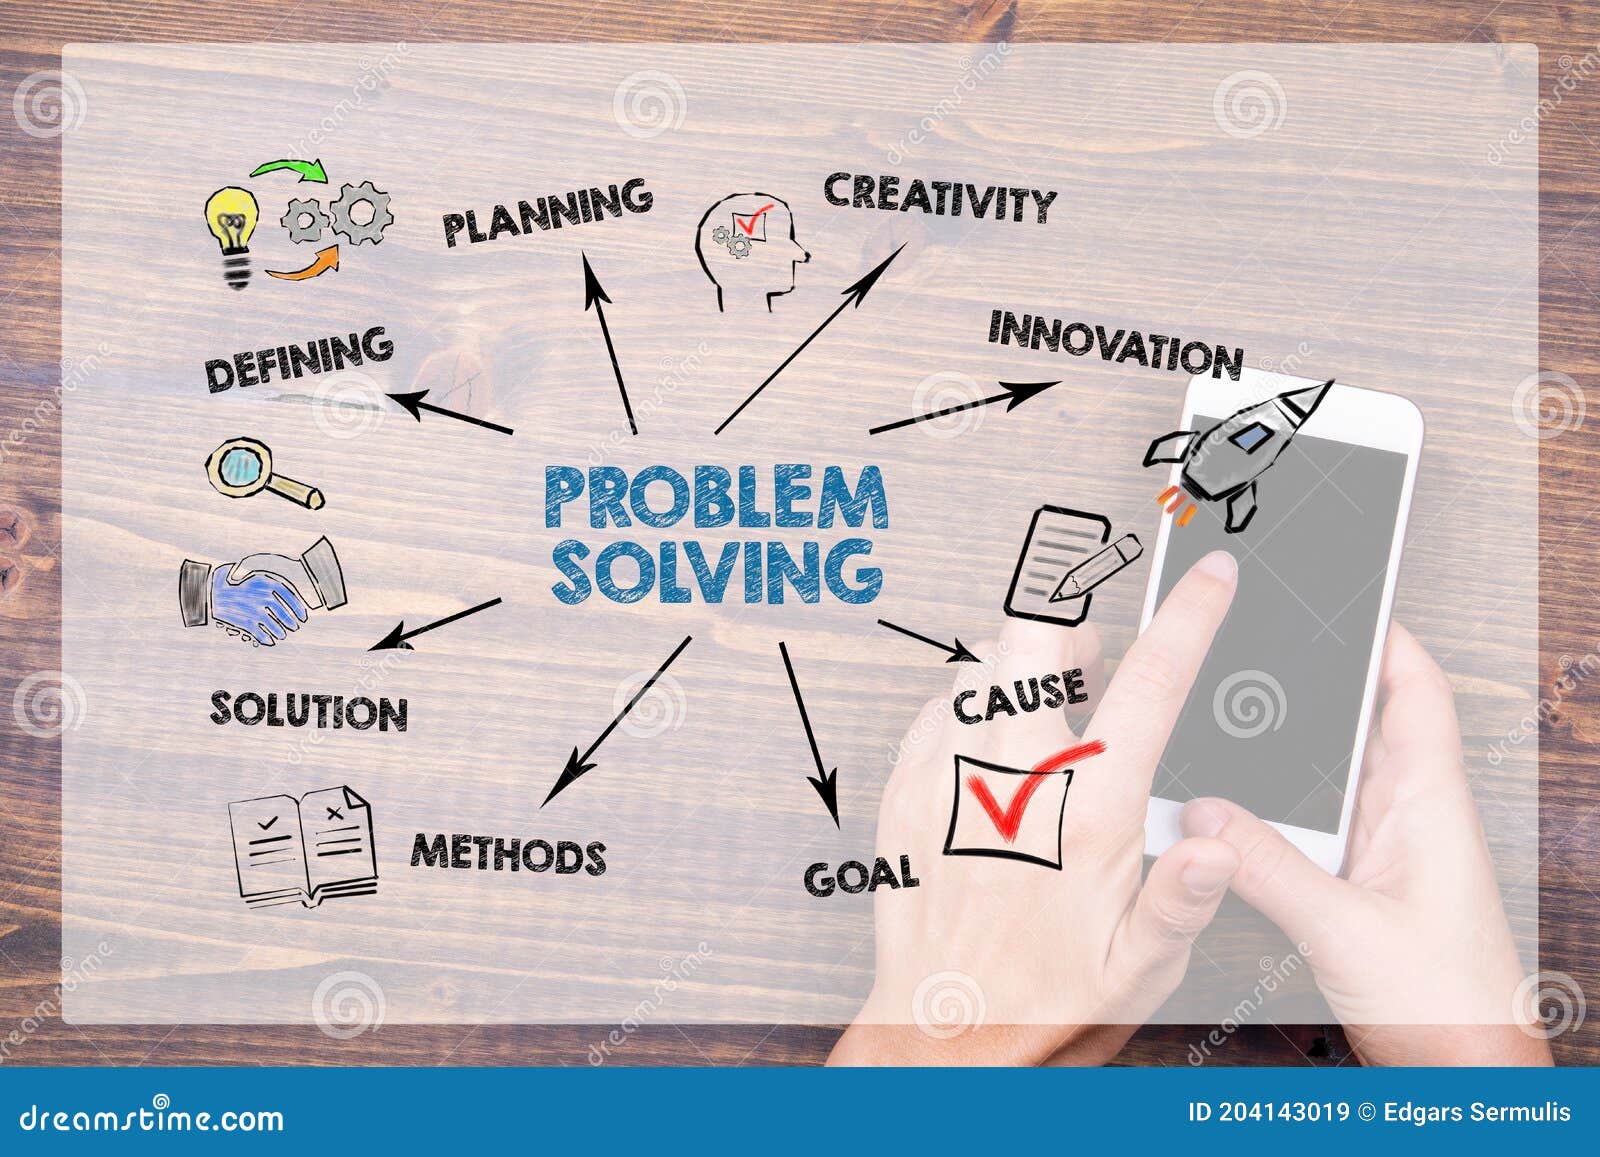 creativity and innovation problem solving